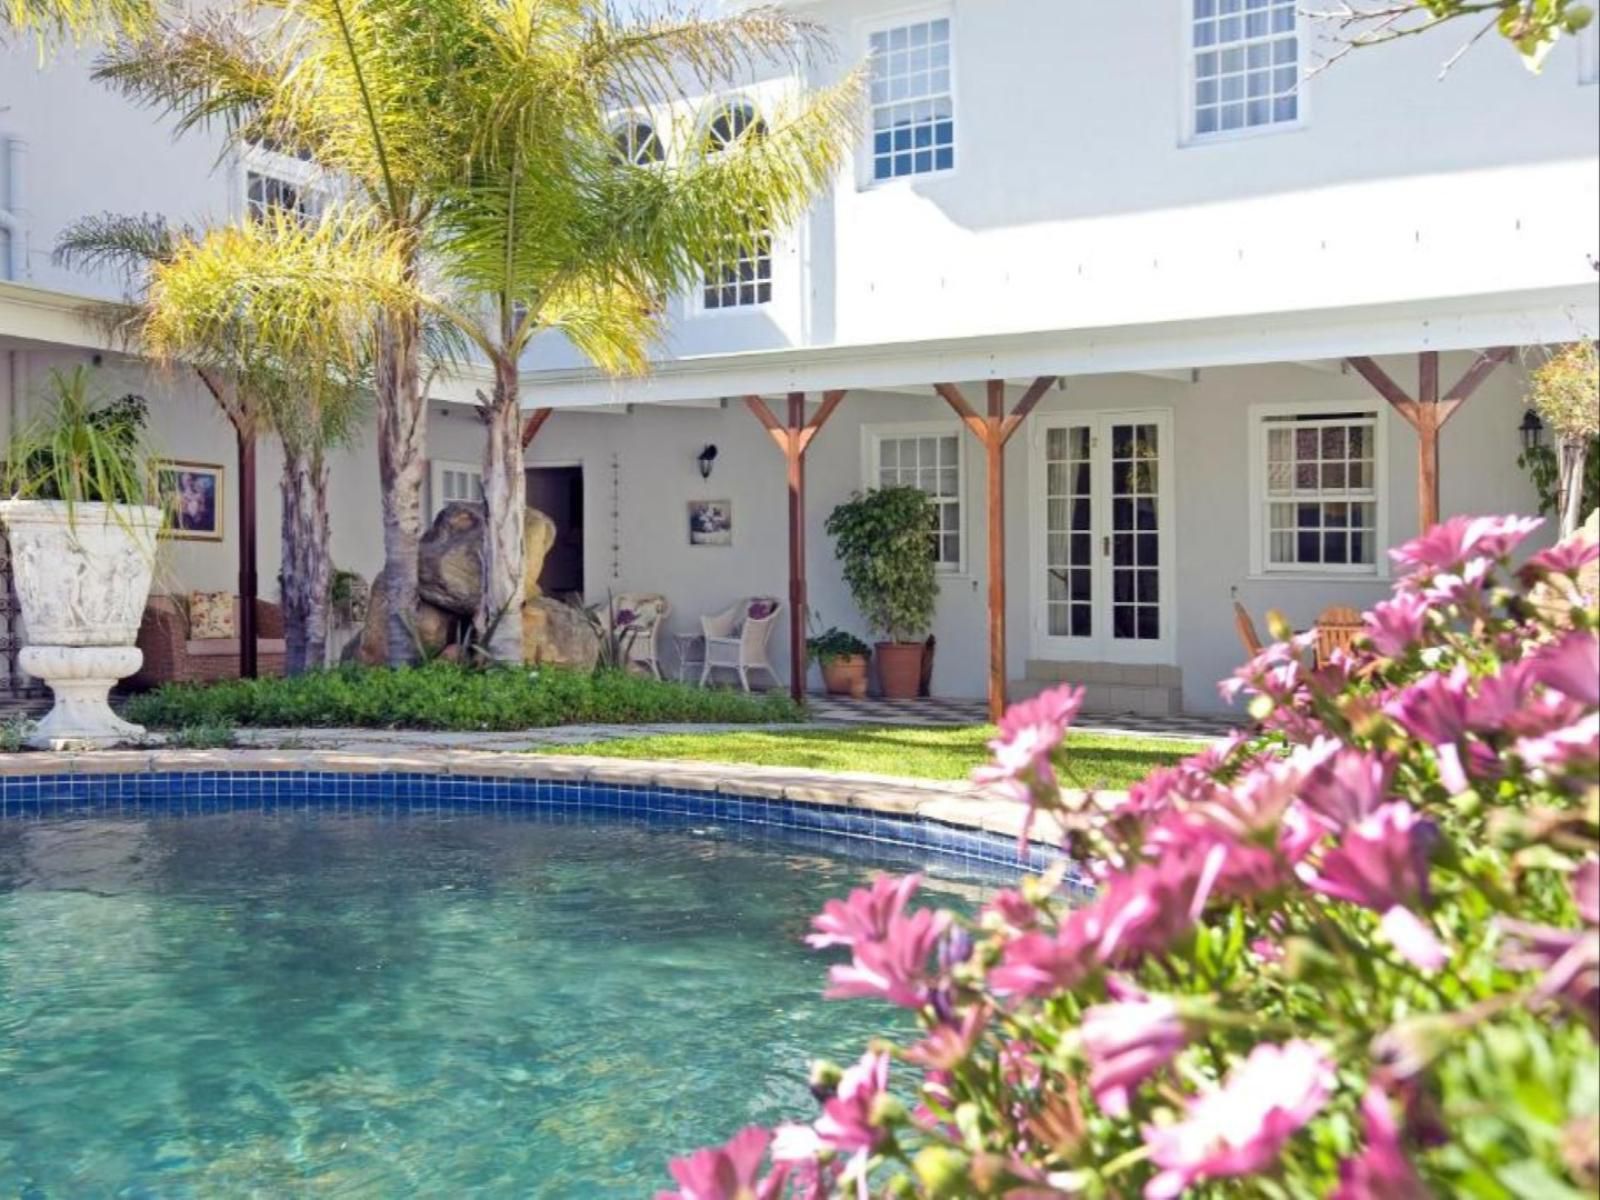 Capeblue Manor House Lakeside Cape Town Western Cape South Africa Complementary Colors, House, Building, Architecture, Palm Tree, Plant, Nature, Wood, Swimming Pool